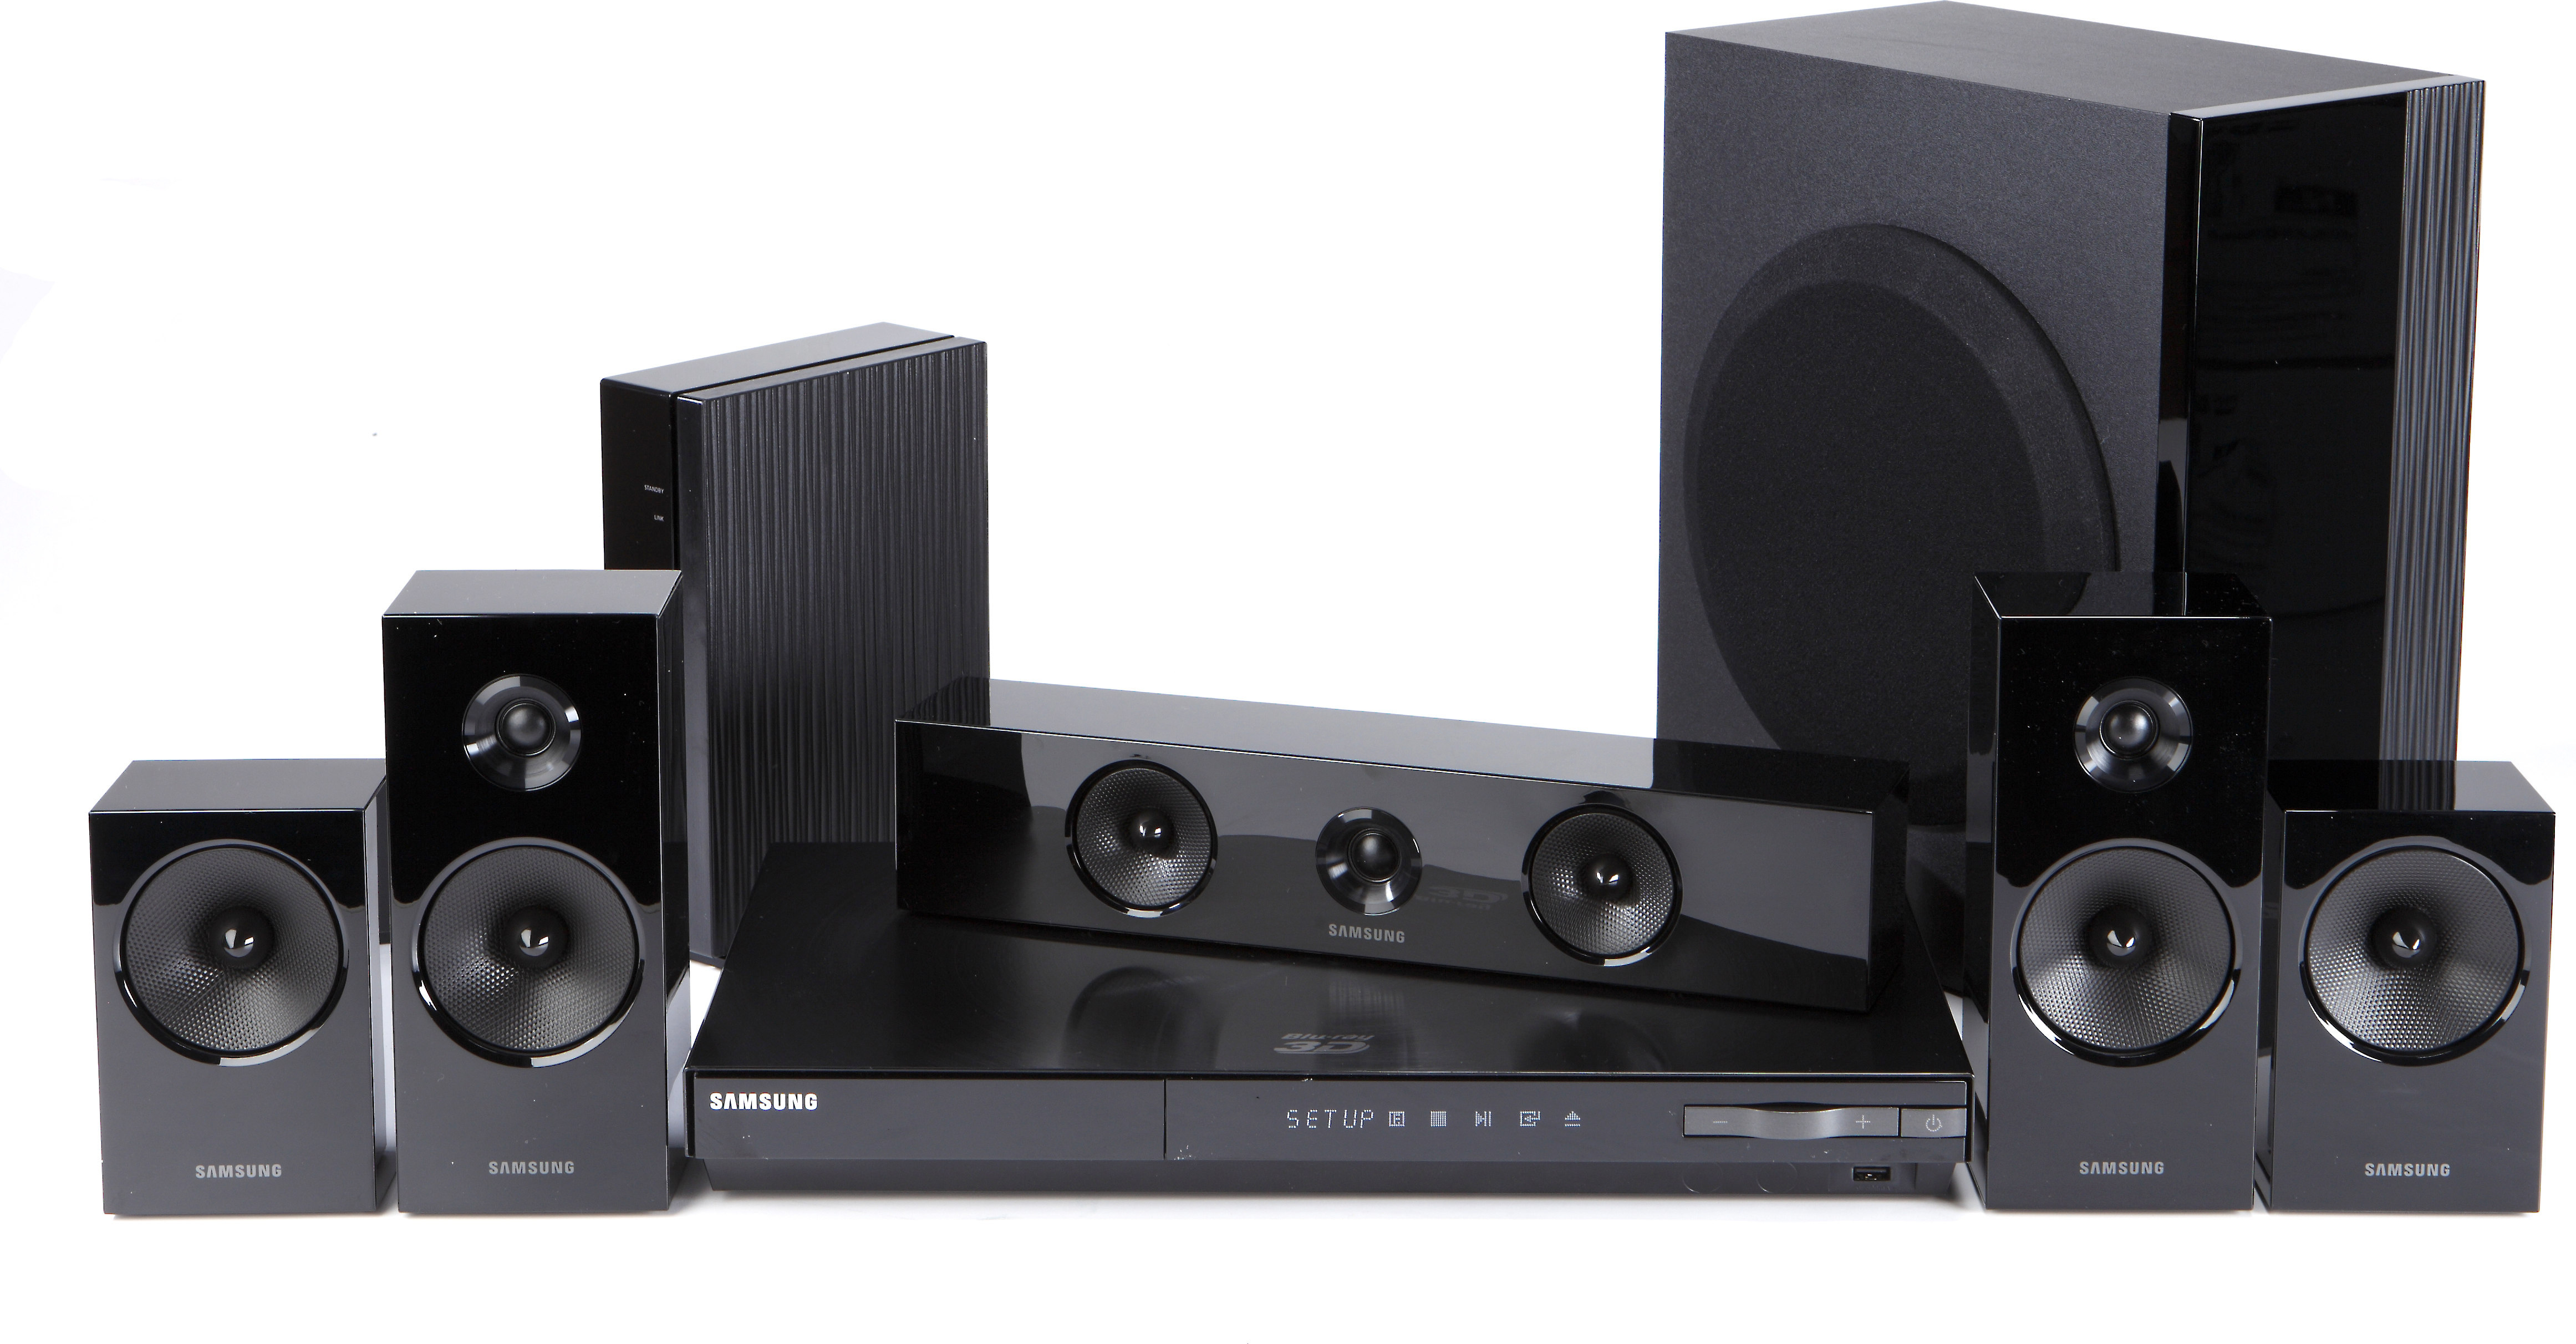 blu ray stereo system